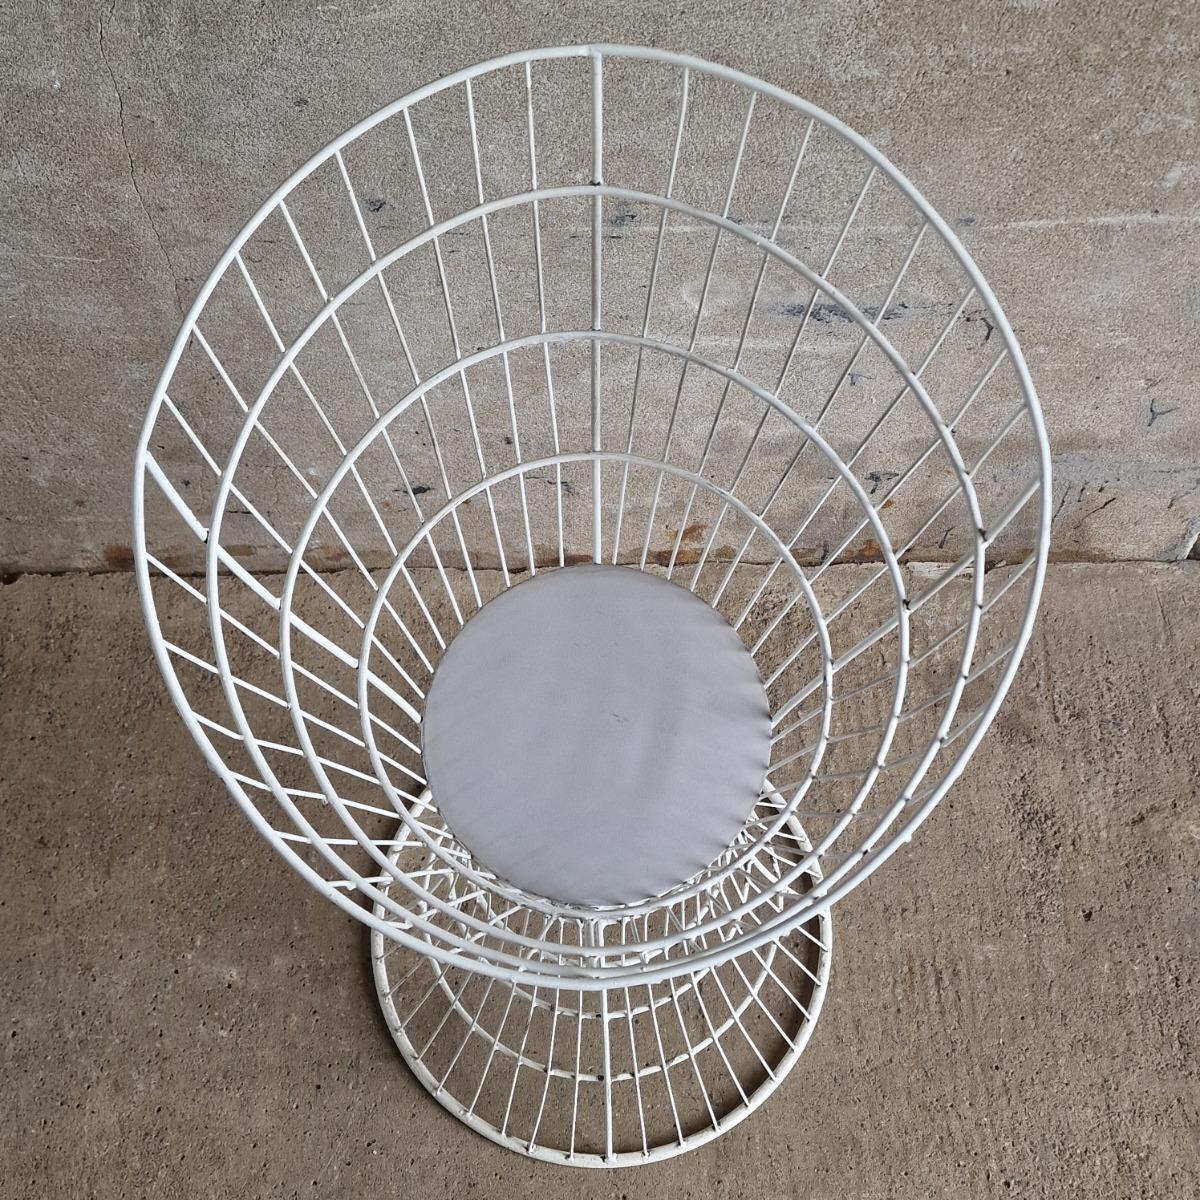 Pair of white metal wire baskets